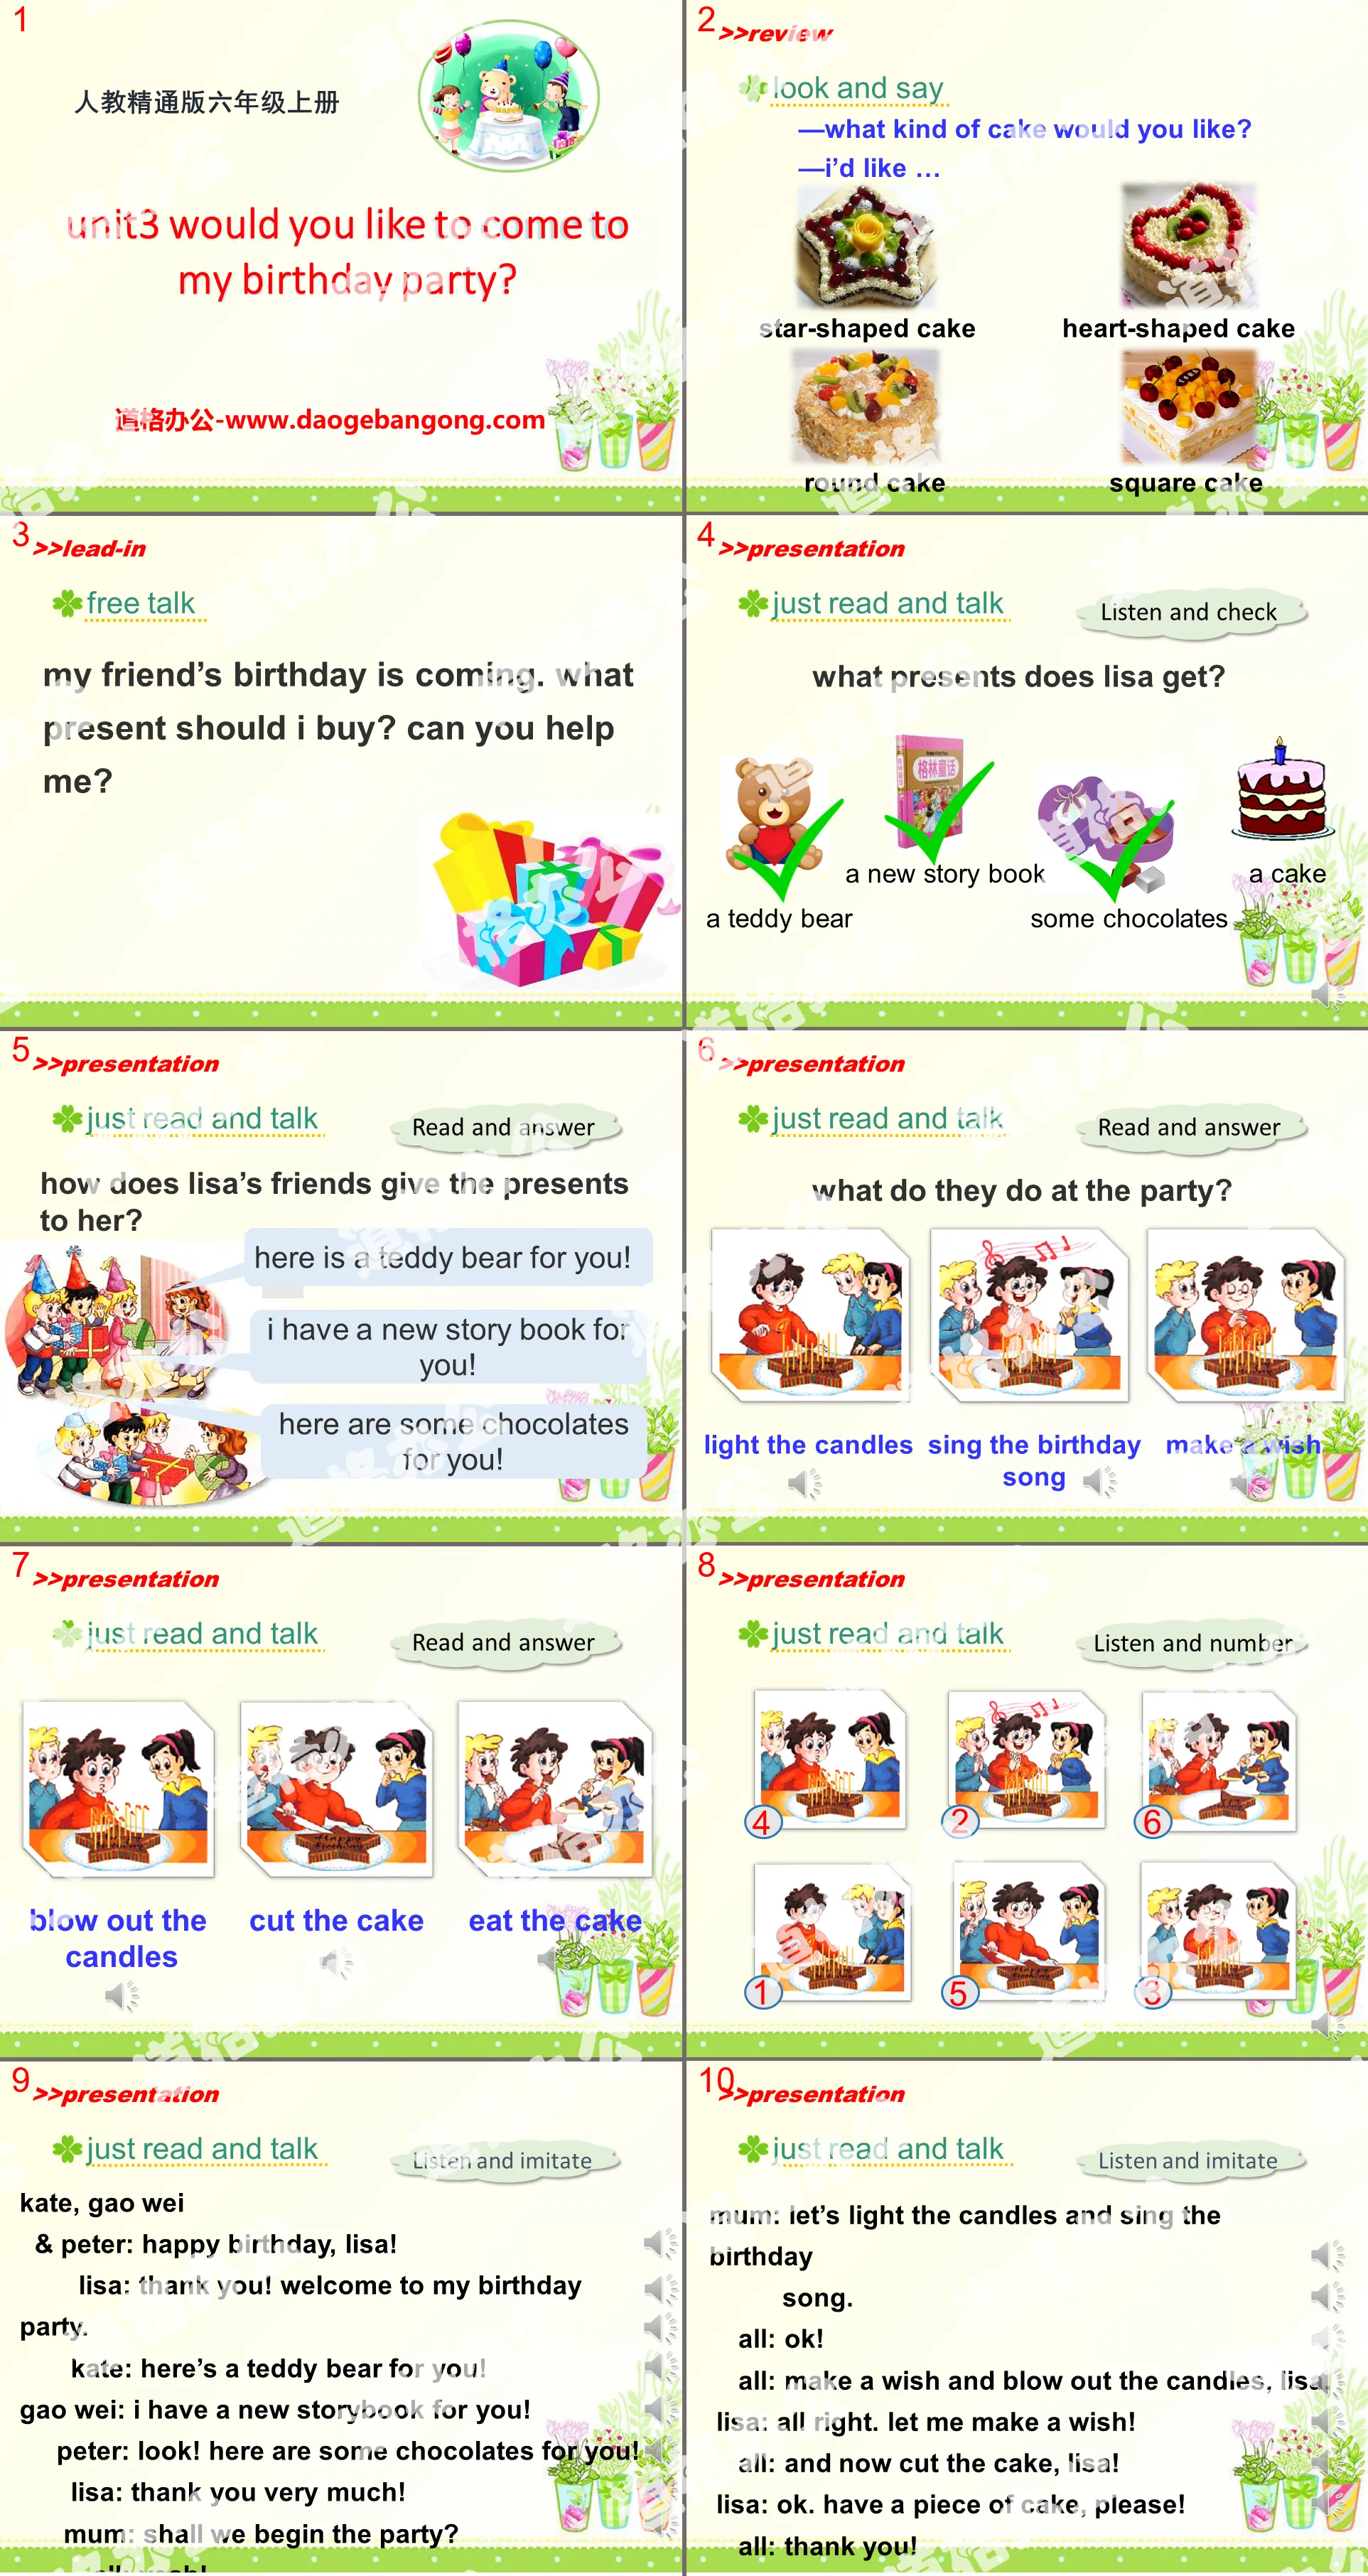 "Would you like to come to my birthday party?" PPT courseware 3